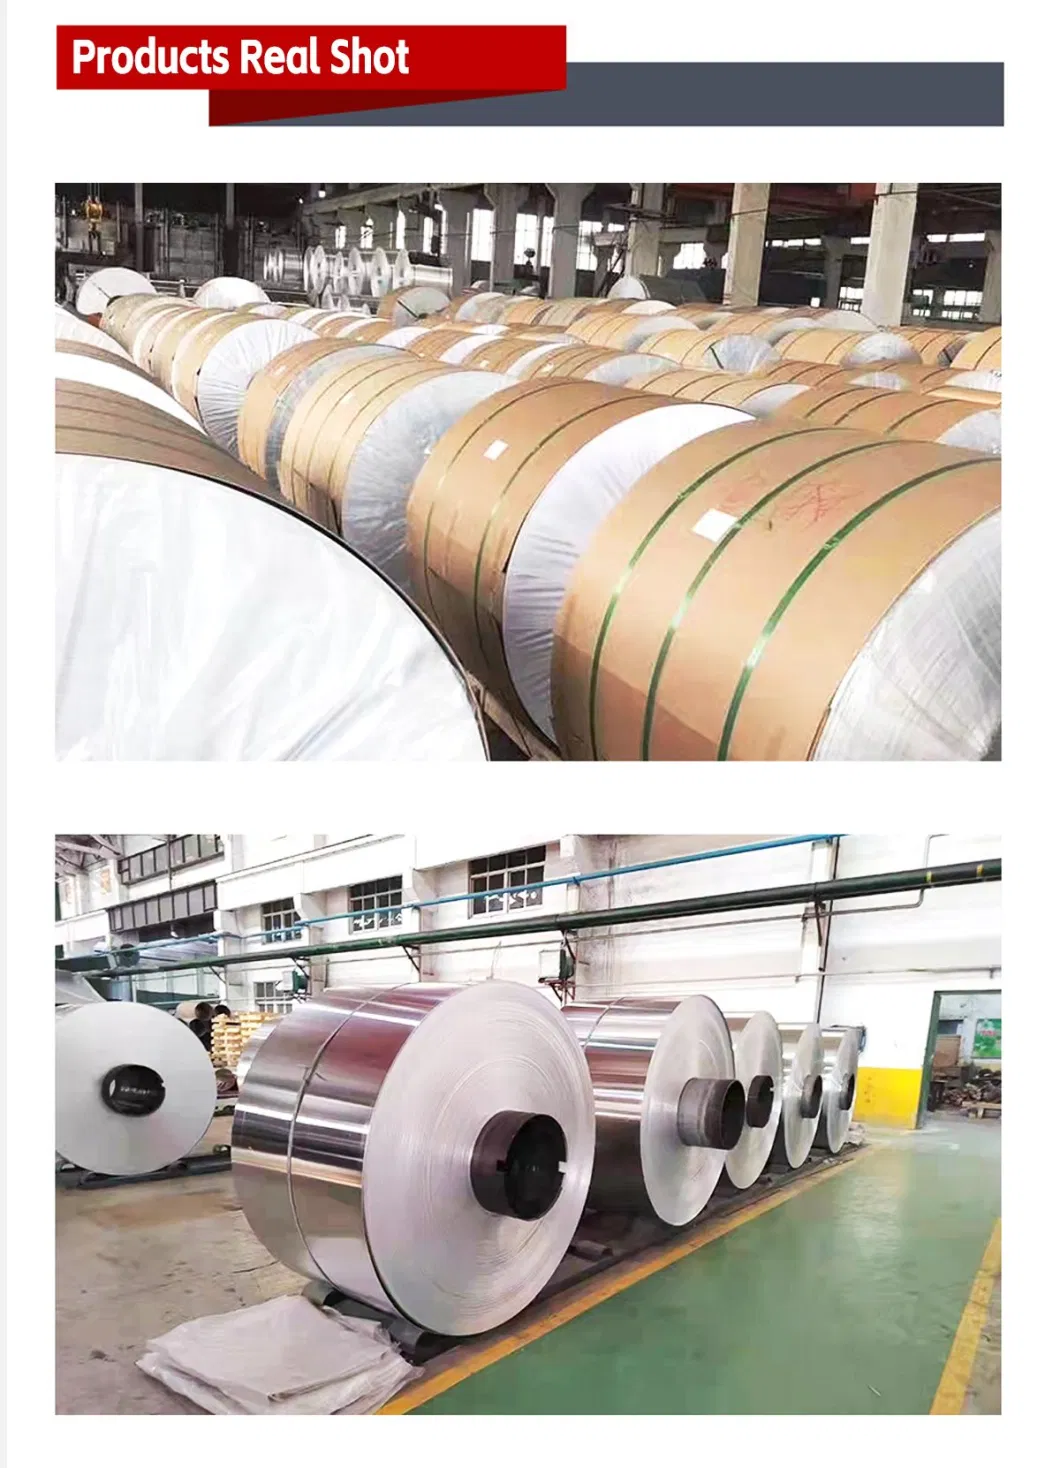 Ready Stock Industrial Thermal Insulation Aluminum Skin/Roll/Foil